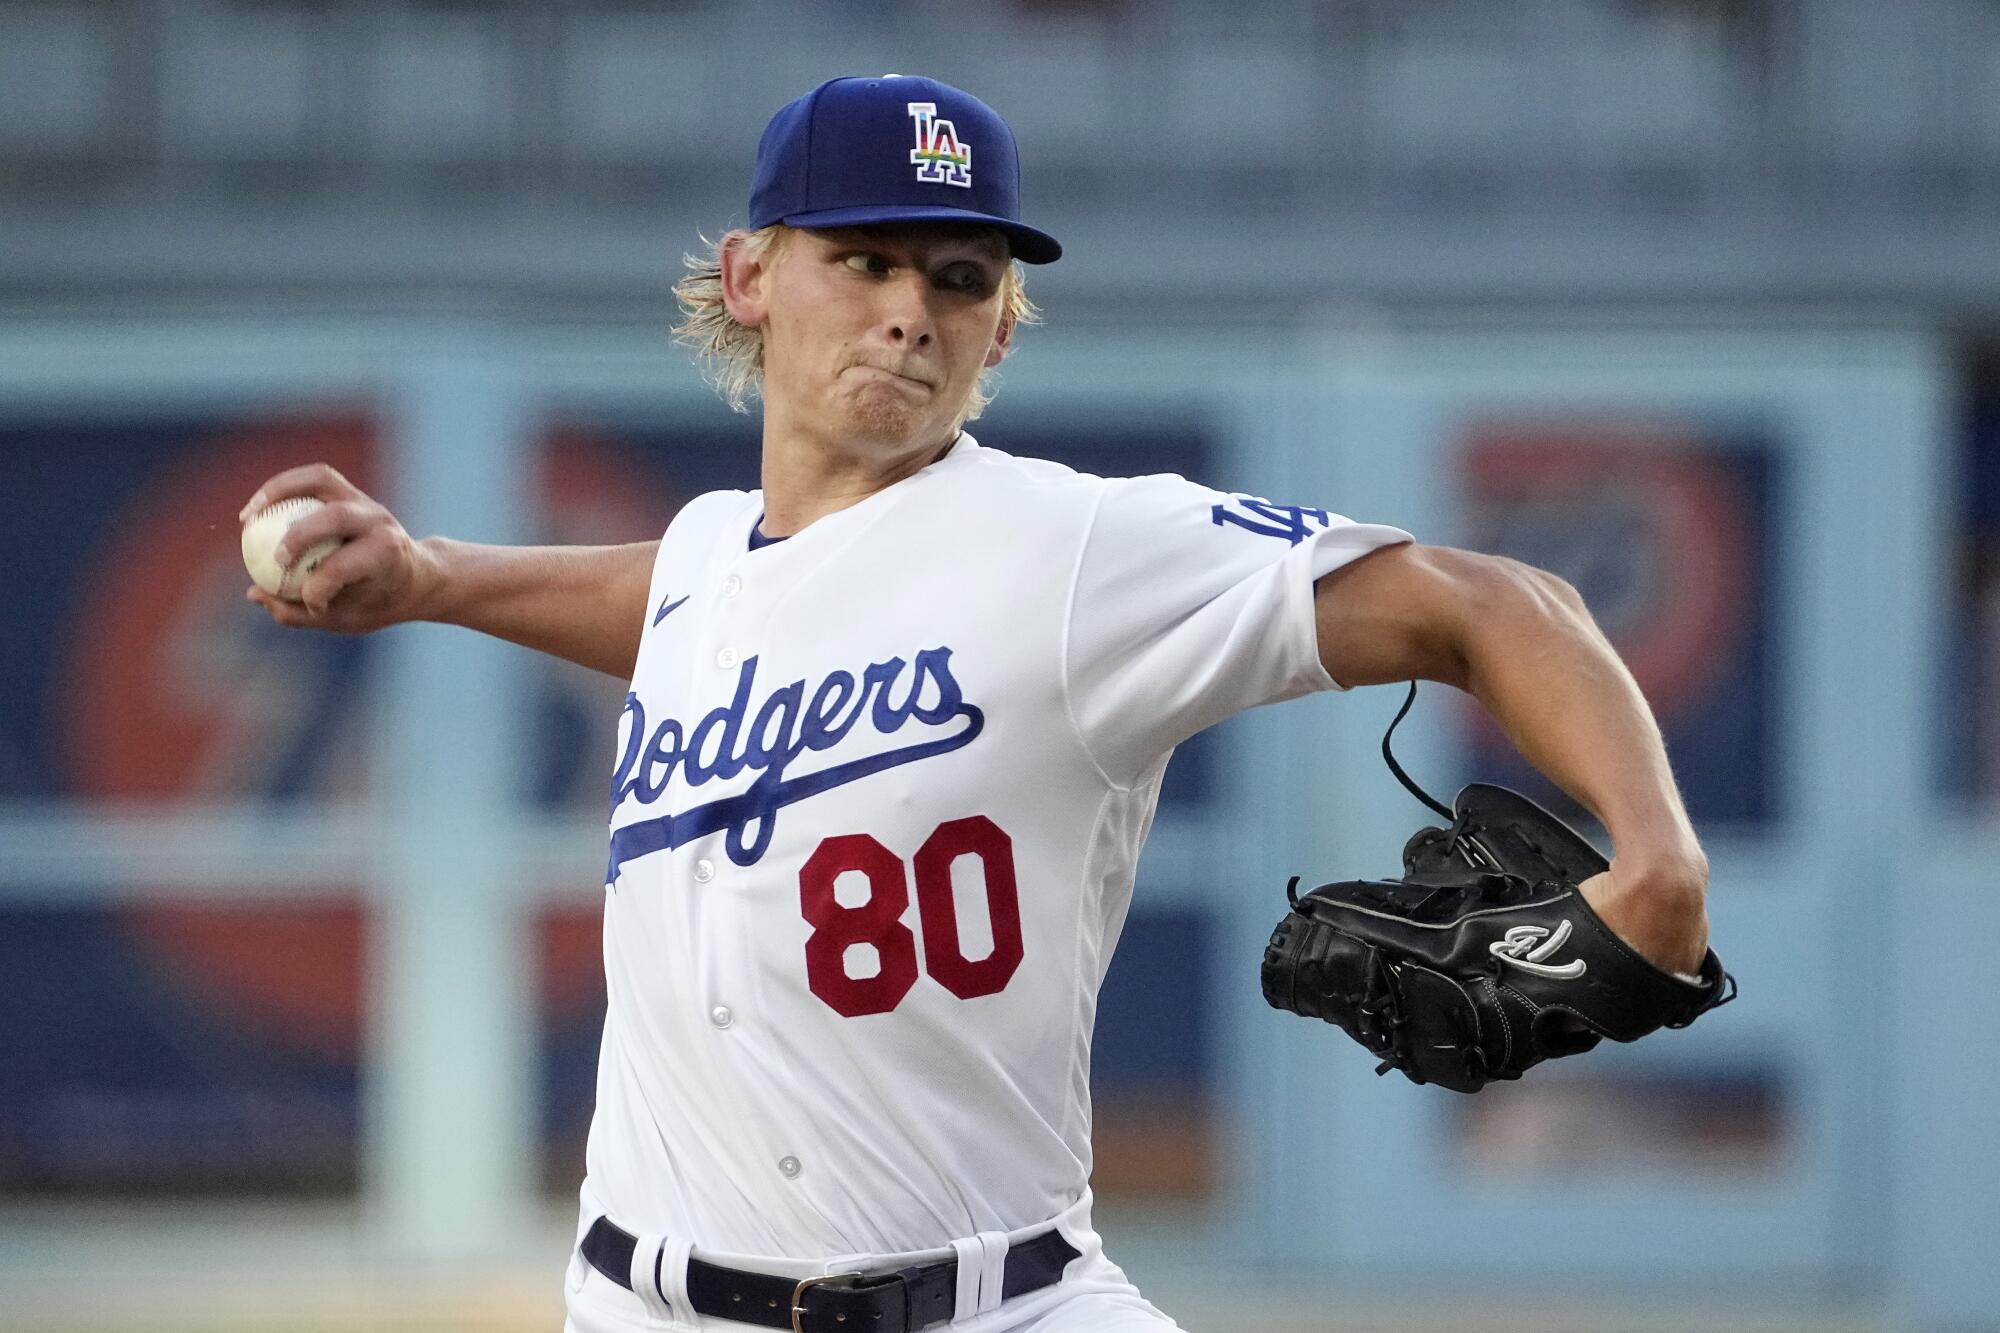 Dodgers starting pitcher Emmet Sheehan delivers during the first inning against the San Francisco Giants.